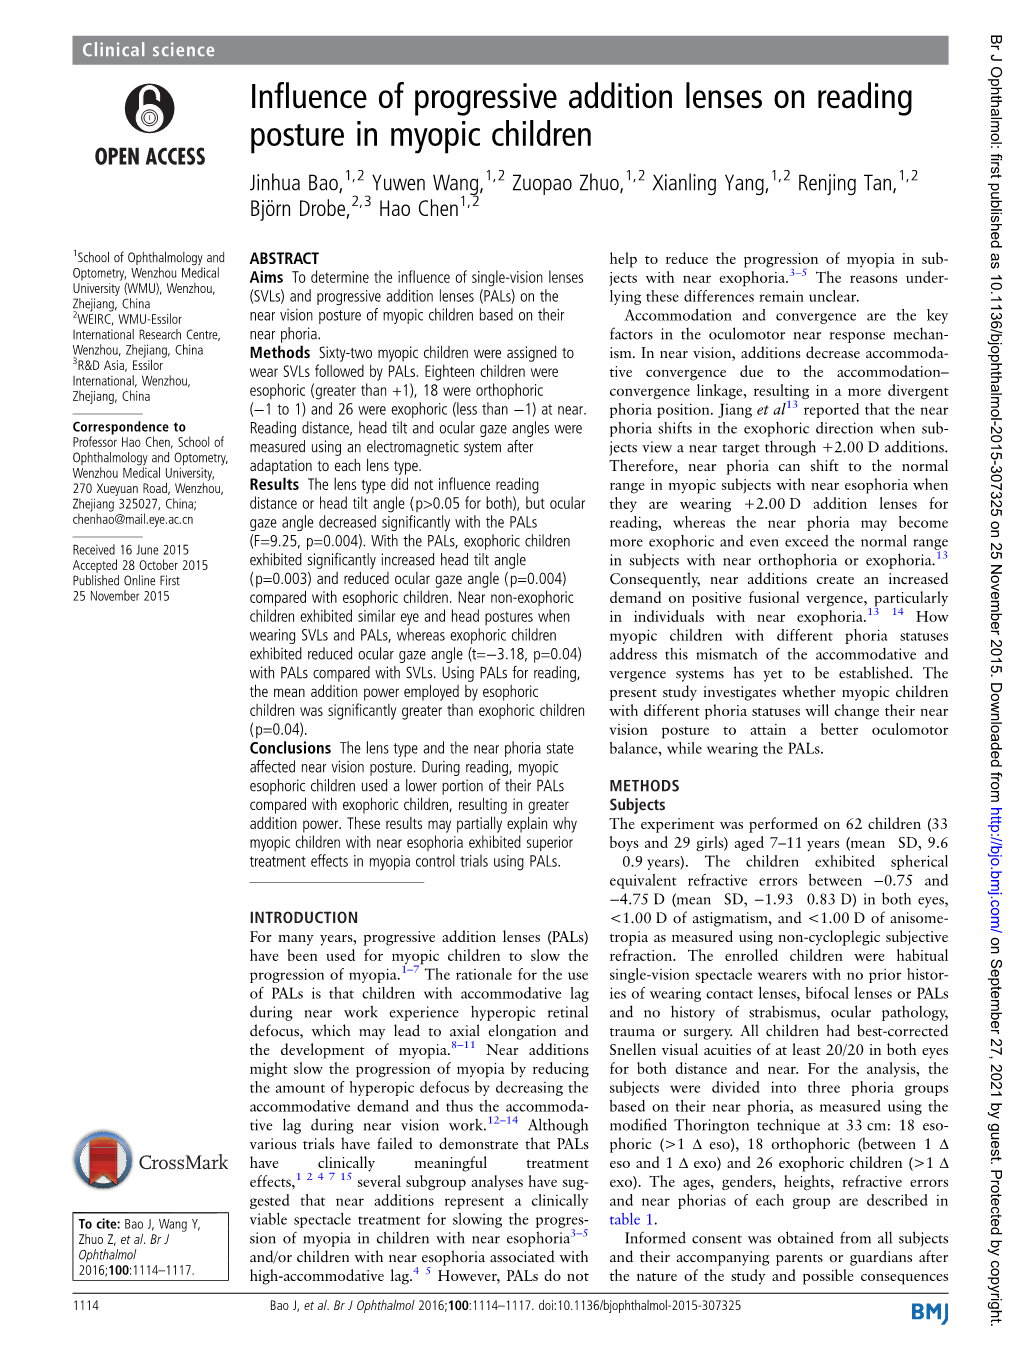 Influence of Progressive Addition Lenses on Reading Posture In